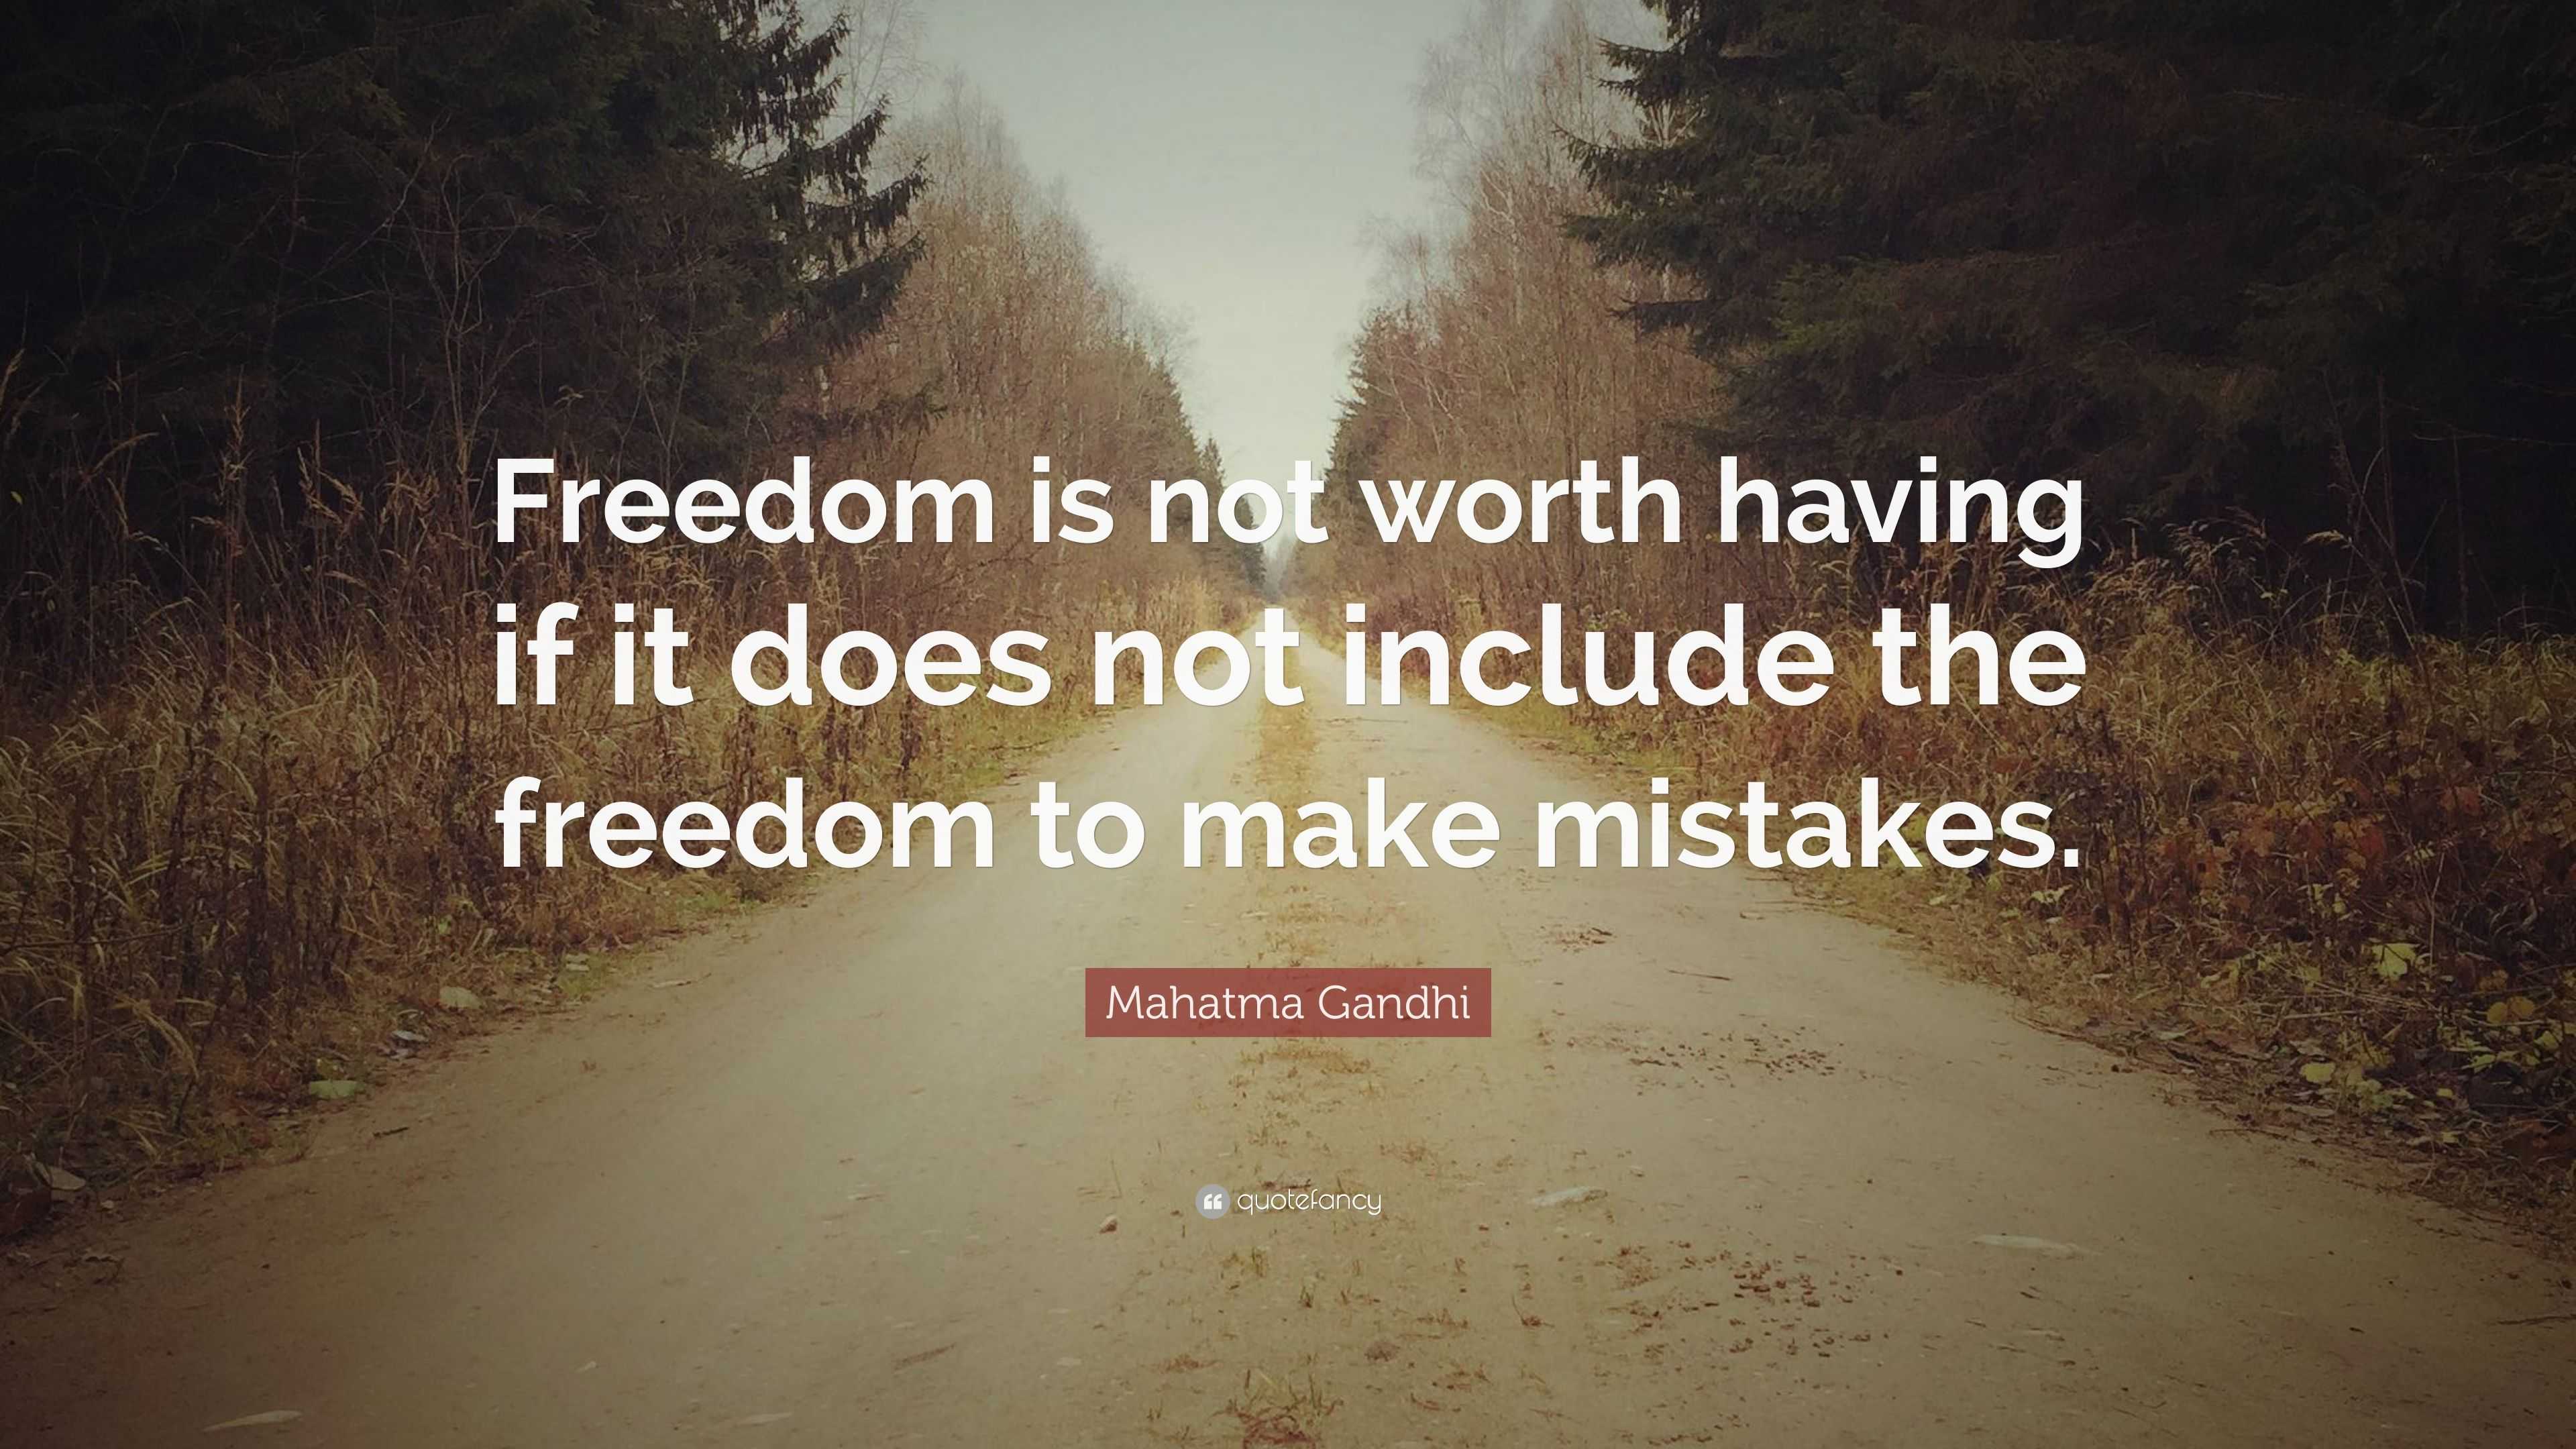 Mahatma Gandhi Quote: “Freedom is not worth having if it does not